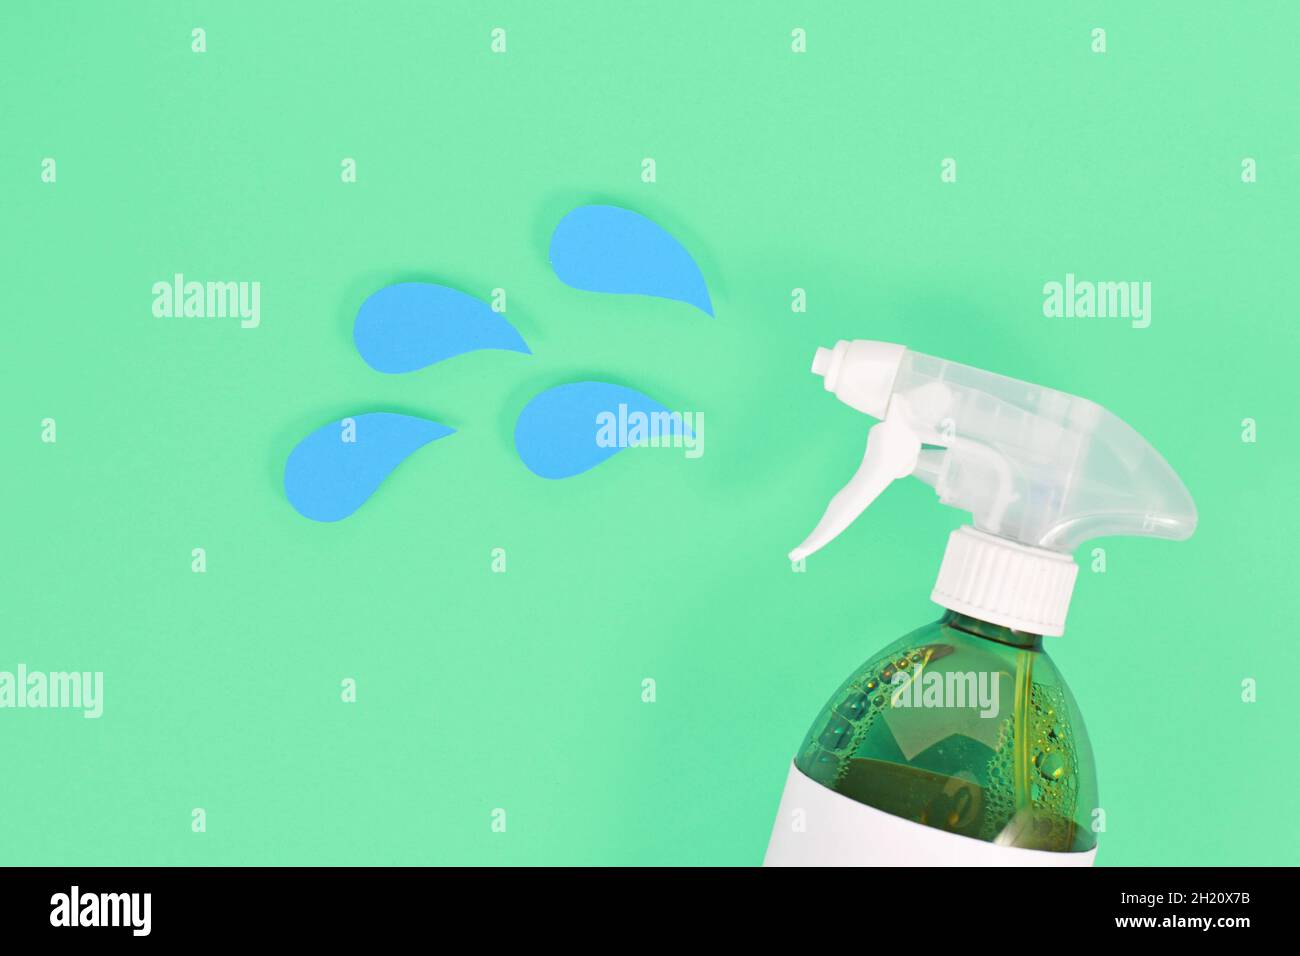 Green cleaning agent spray bottle with blue liquid drops cut from paper Stock Photo